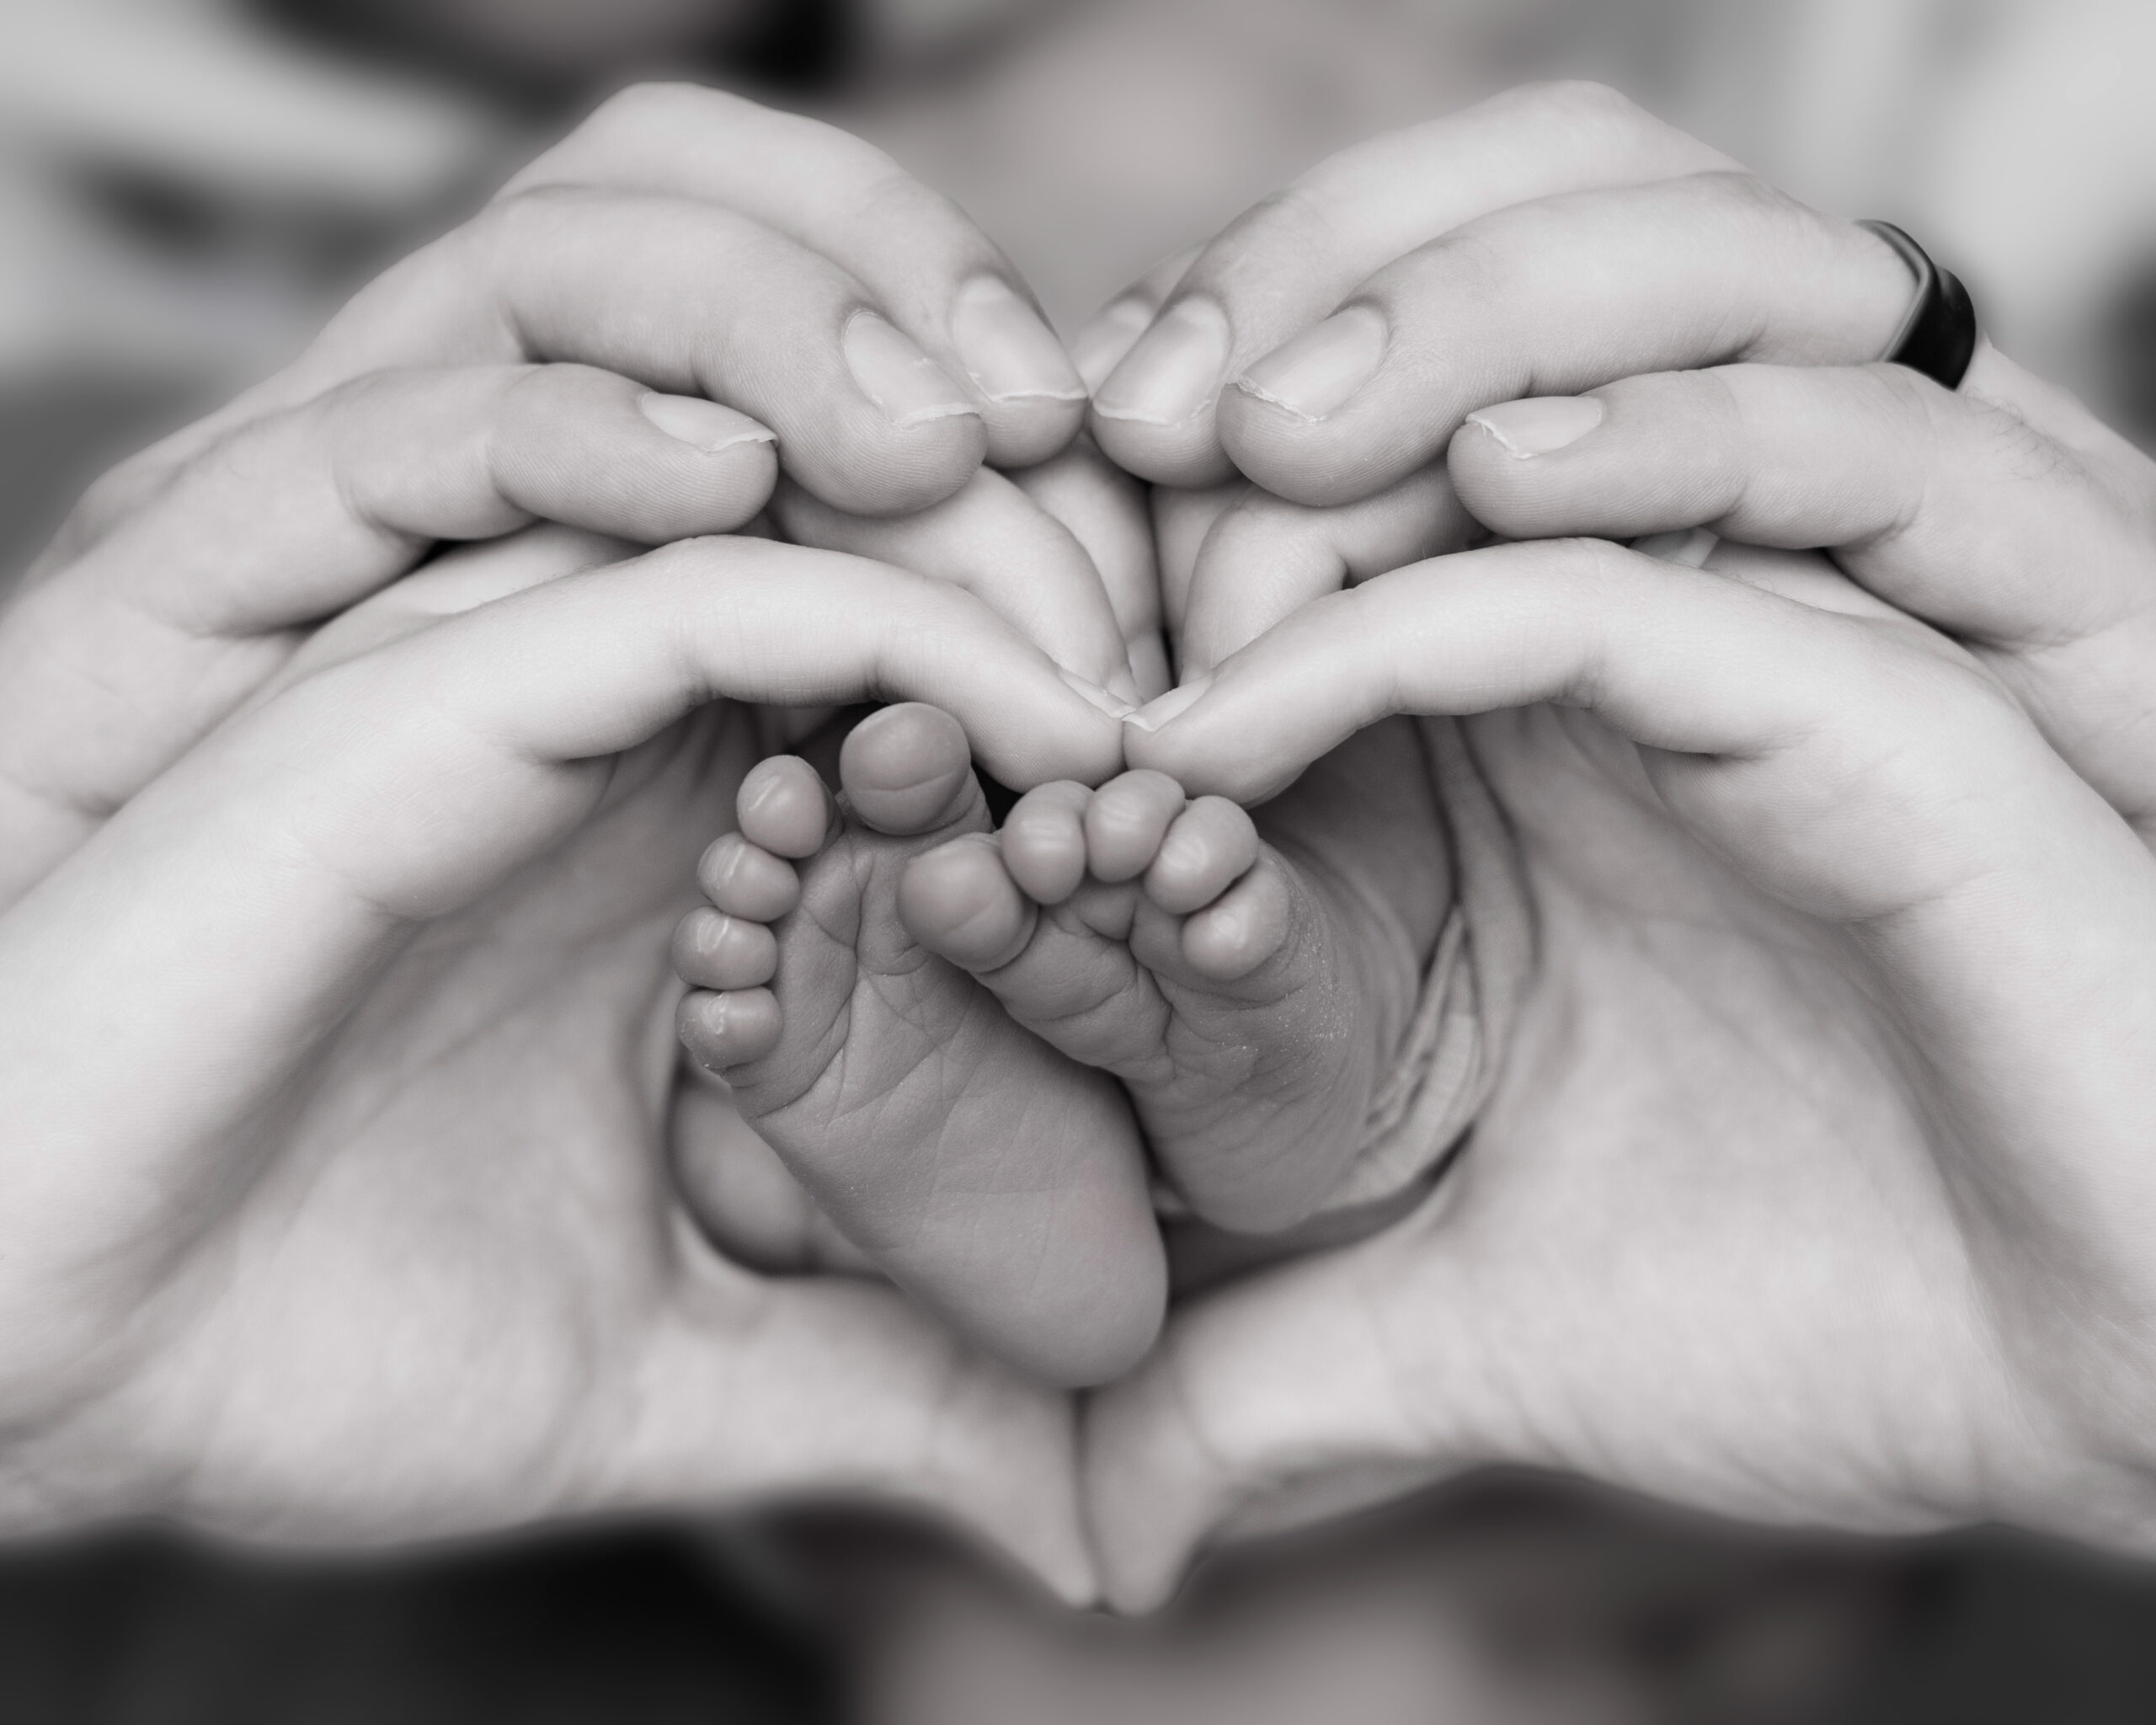 Newborn Photo of babies feet and parents' hands in the shape of a heart.